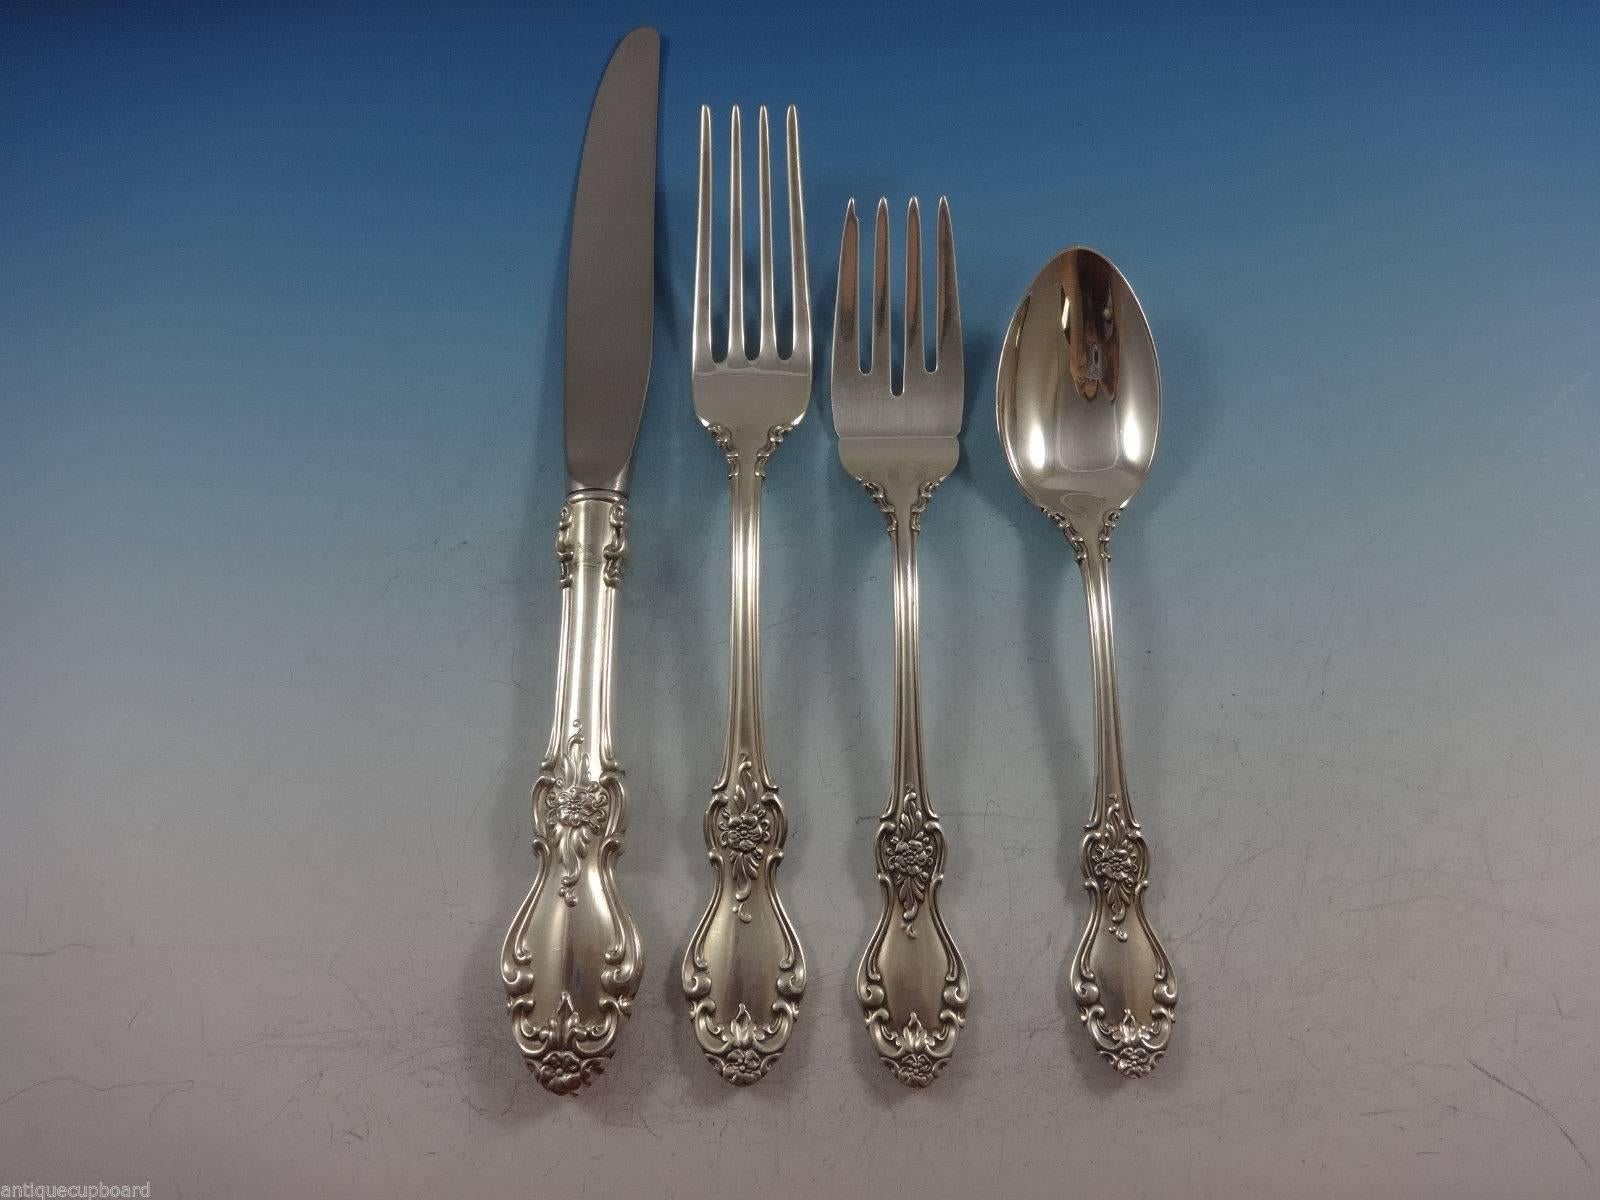 Stunning Old Virginia by Reed & Barton sterling silver flatware set of 48 pieces. This set includes:

12 knives, 9 1/4